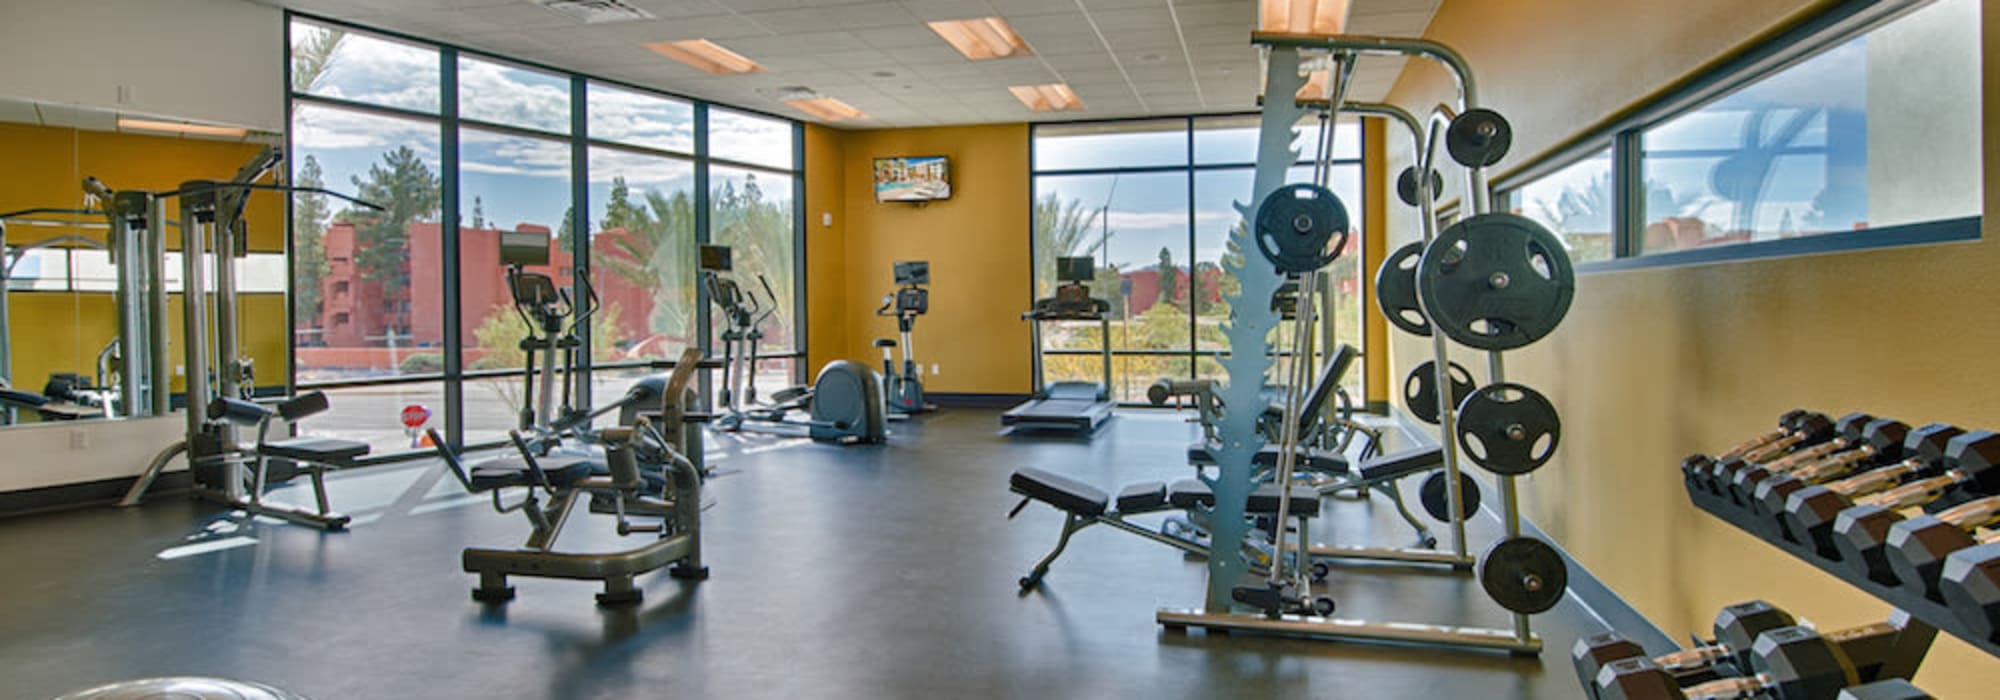 Fitness center at Cactus Forty-2 in Phoenix, Arizona